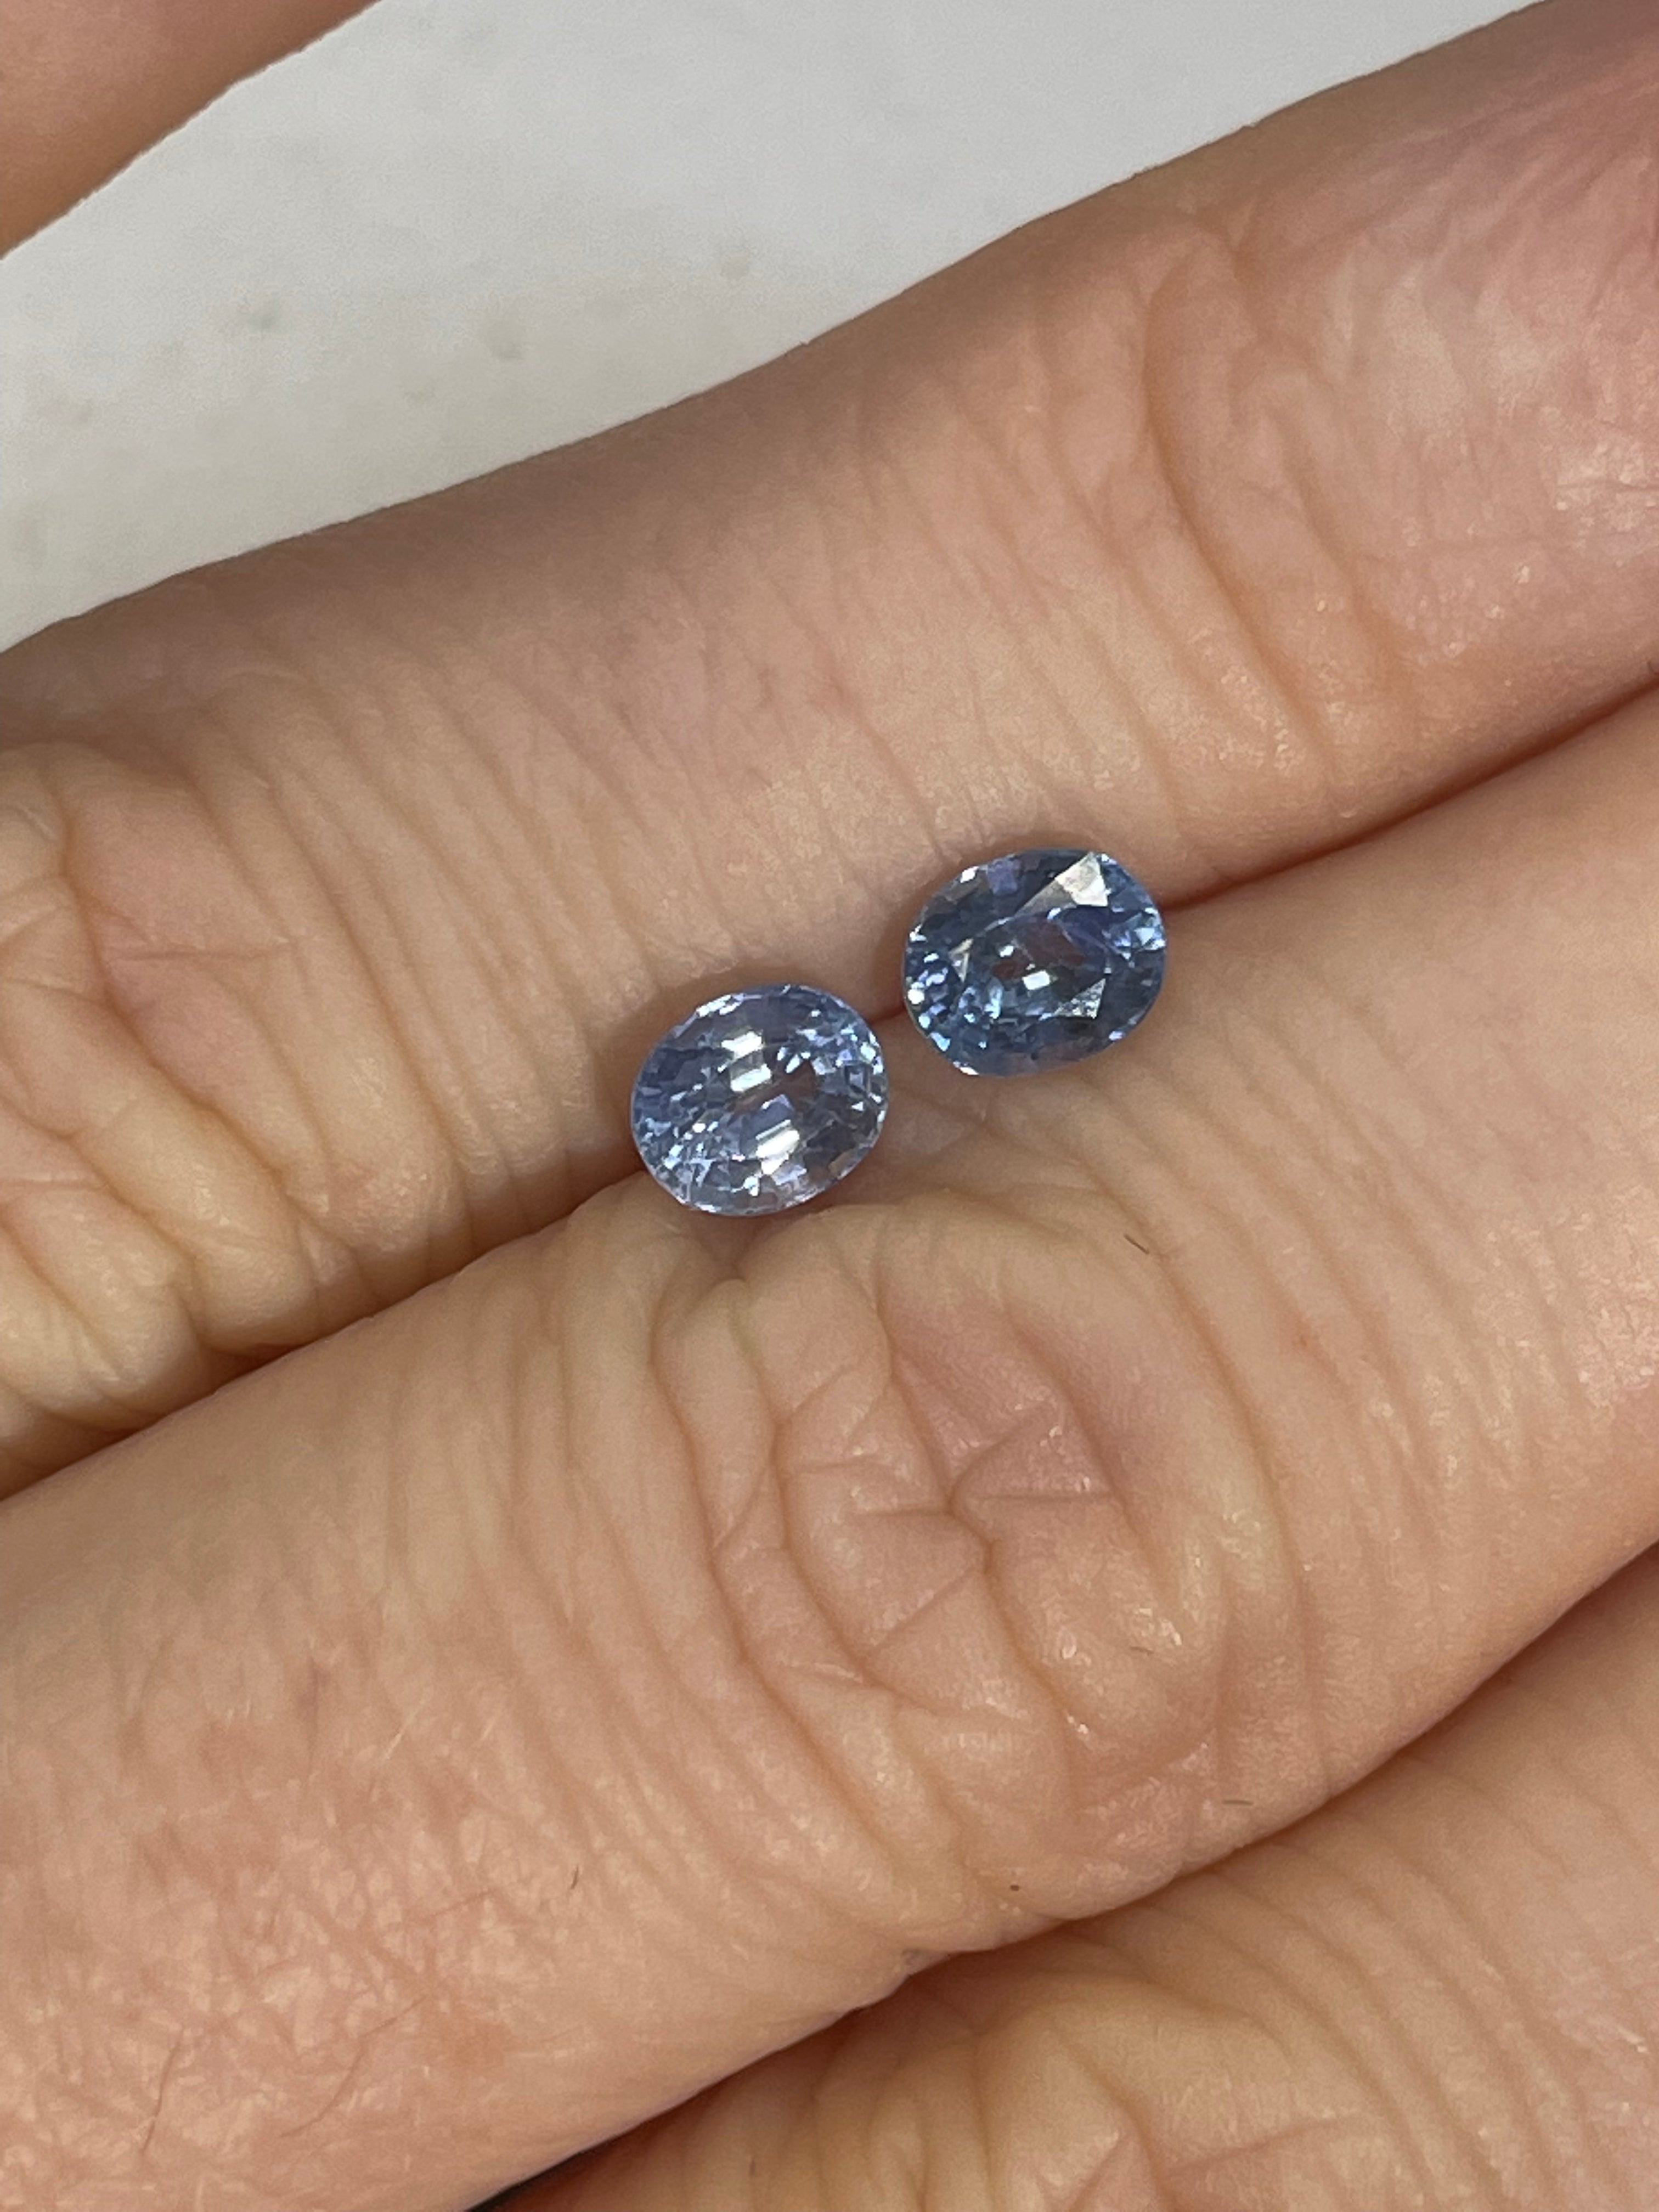 1.12CTW Loose  Oval Sapphire Pair Earth mined Gemstone